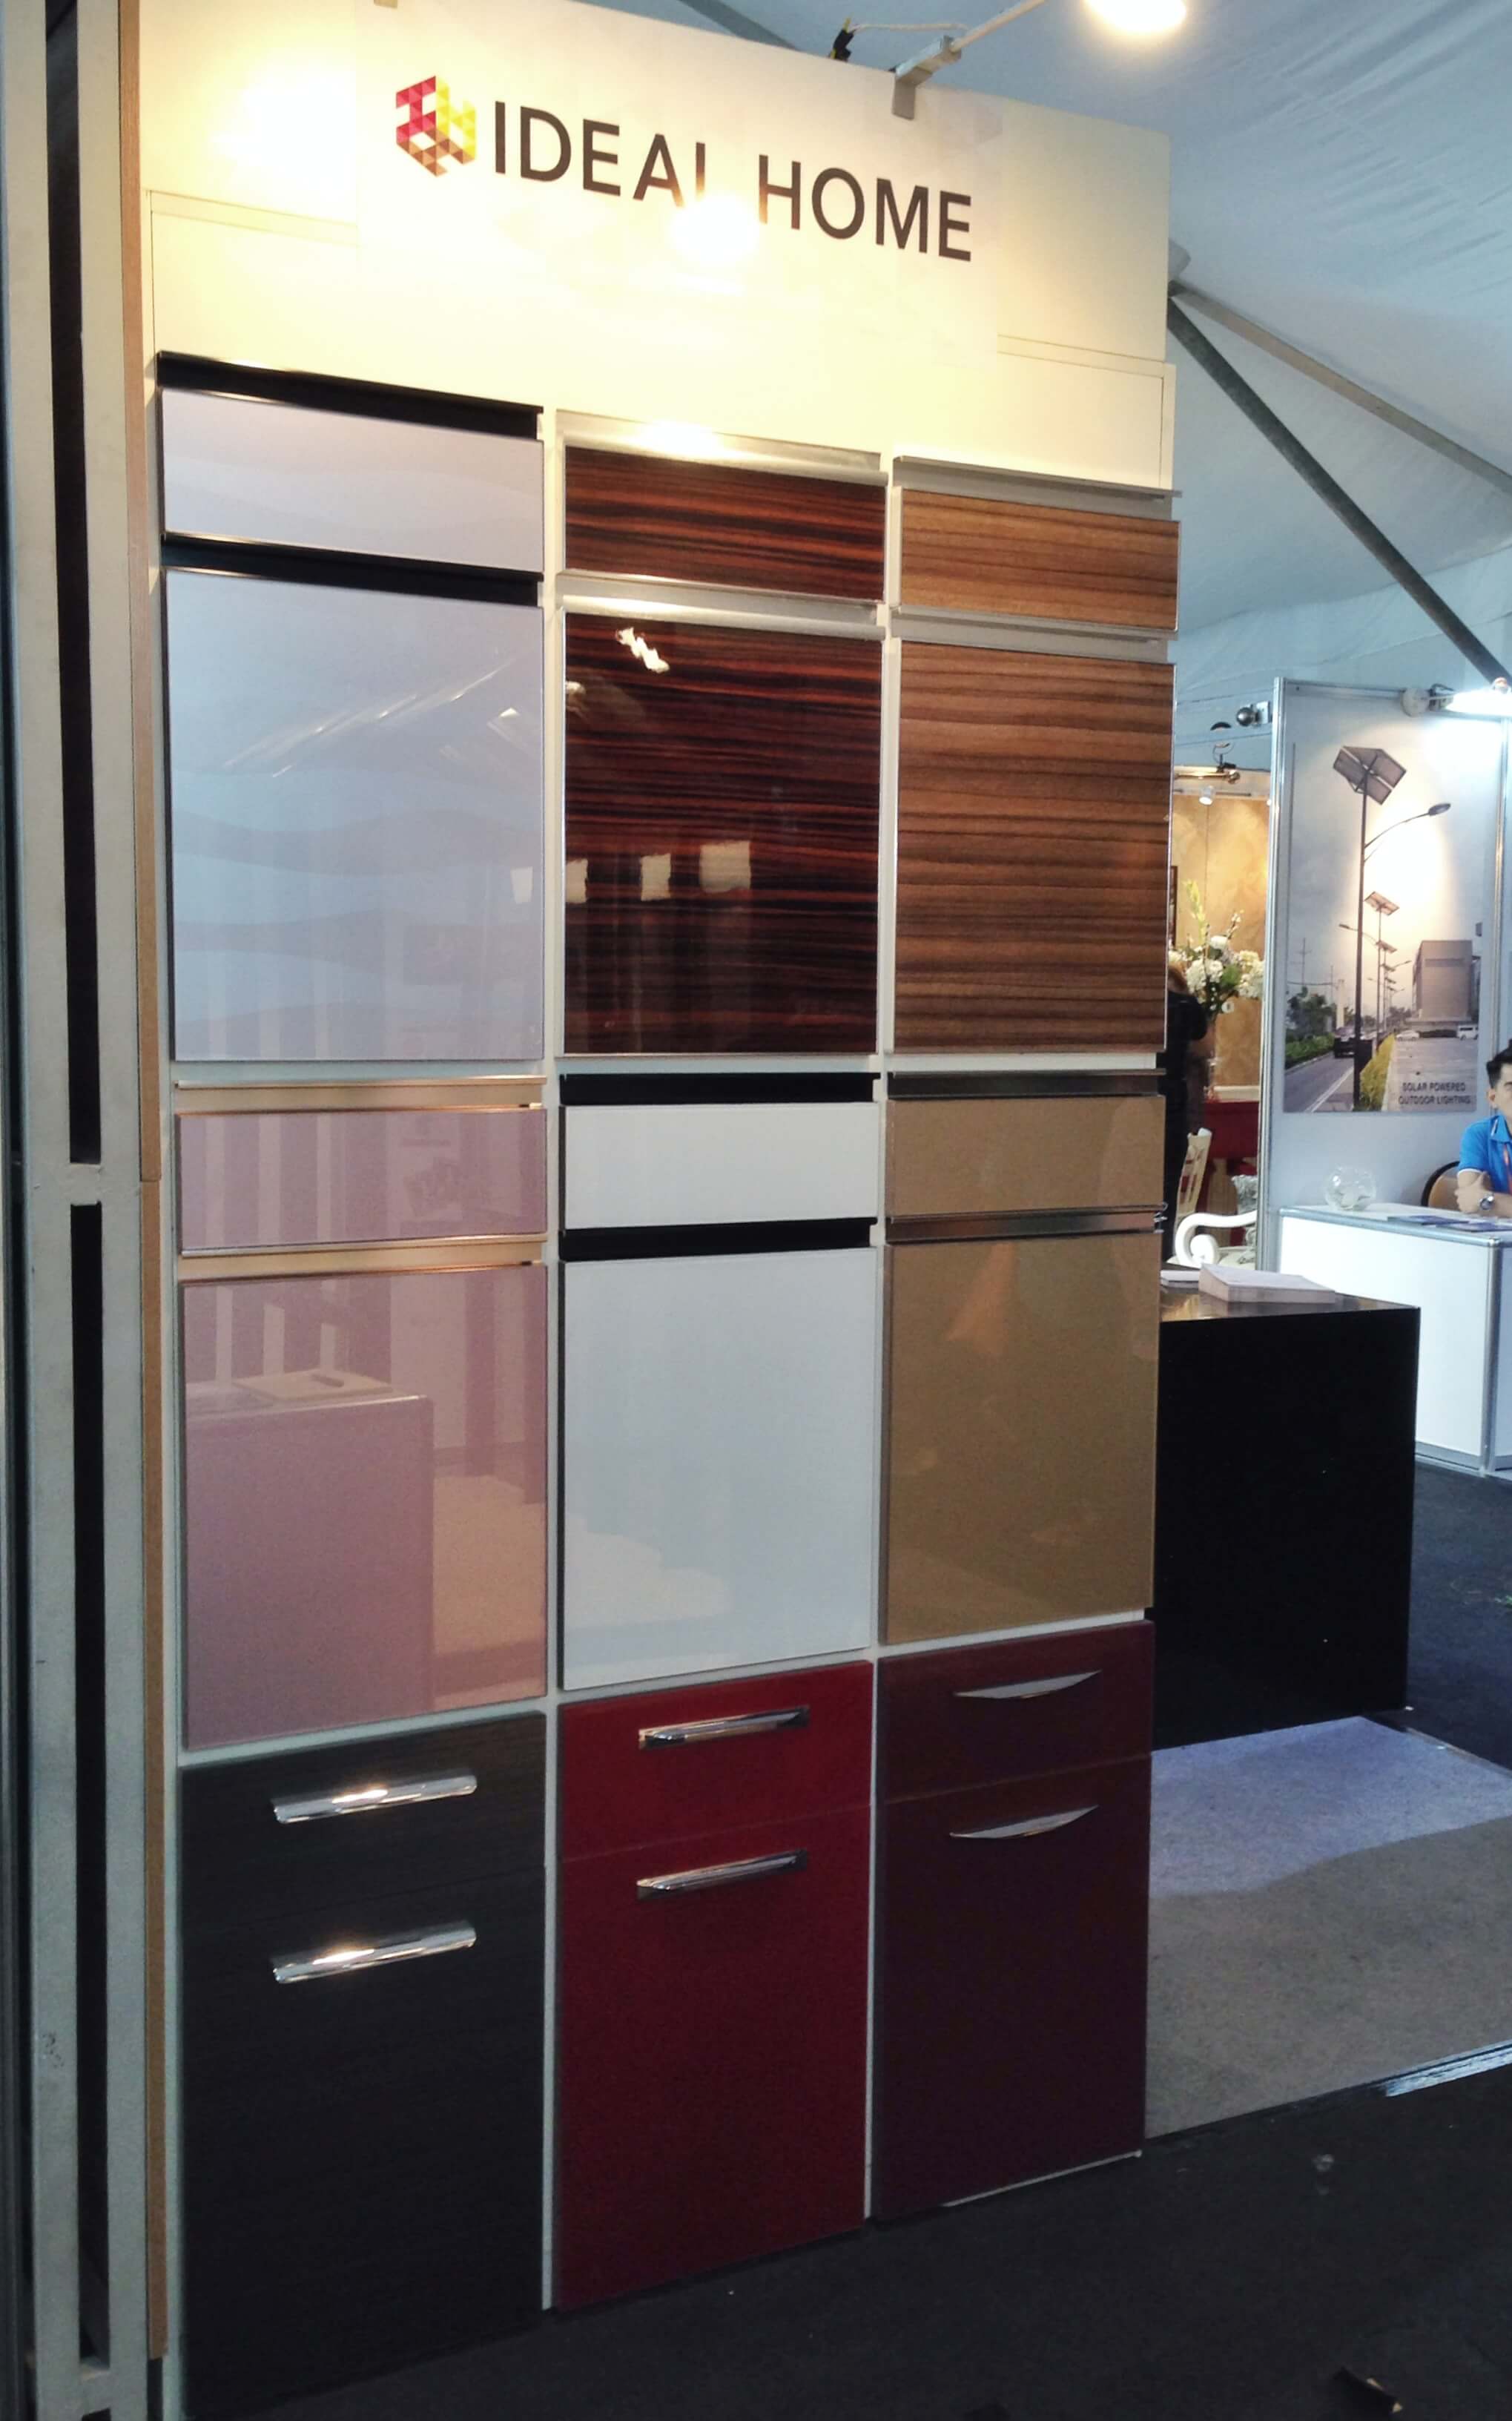 Ideal Home Modular Cabinets Exhibit at Worldbex (2014)